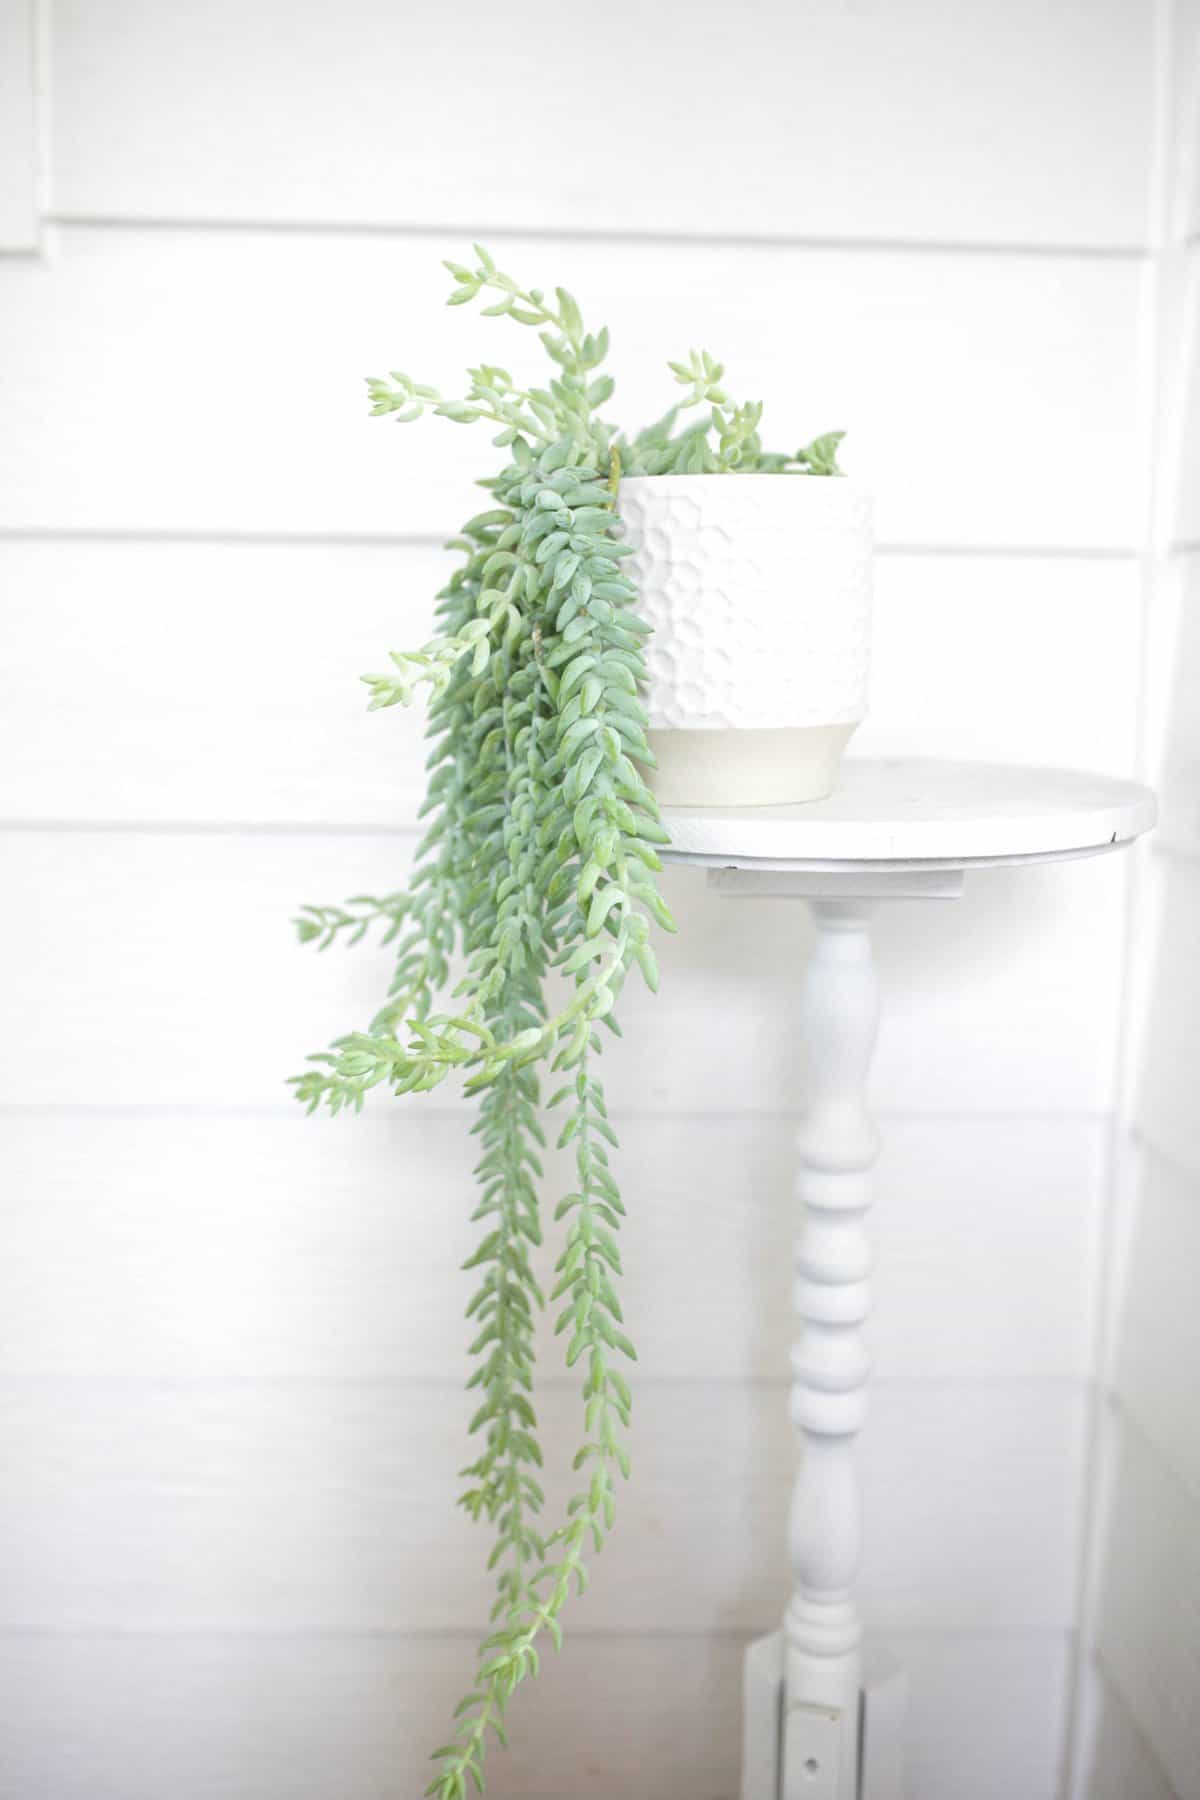 Burro’s Tail on plant stand